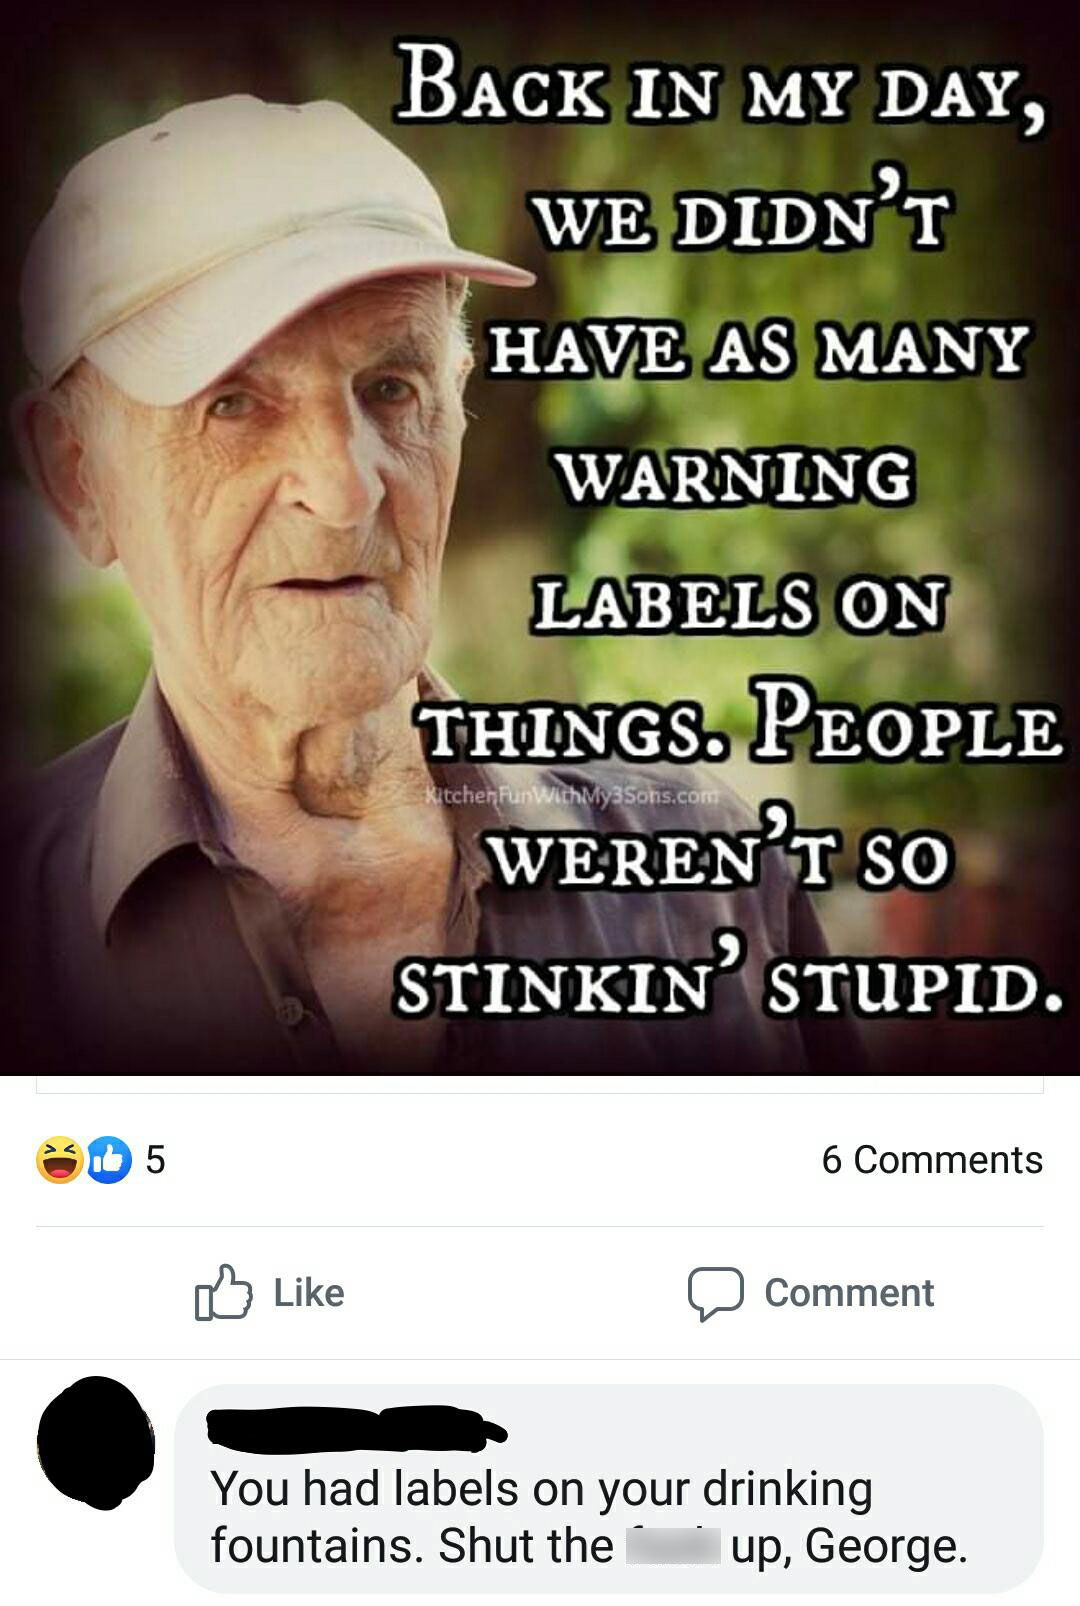 witty comebacks sick burns - 5 Back In My Day, We Didn'T Have As Many Warning Labels On Things. People Kitchen FunWithMy3Sons.com Weren'T So Stinkin Stupid. 6 Comment You had labels on your drinking fountains. Shut the fuck up, George.